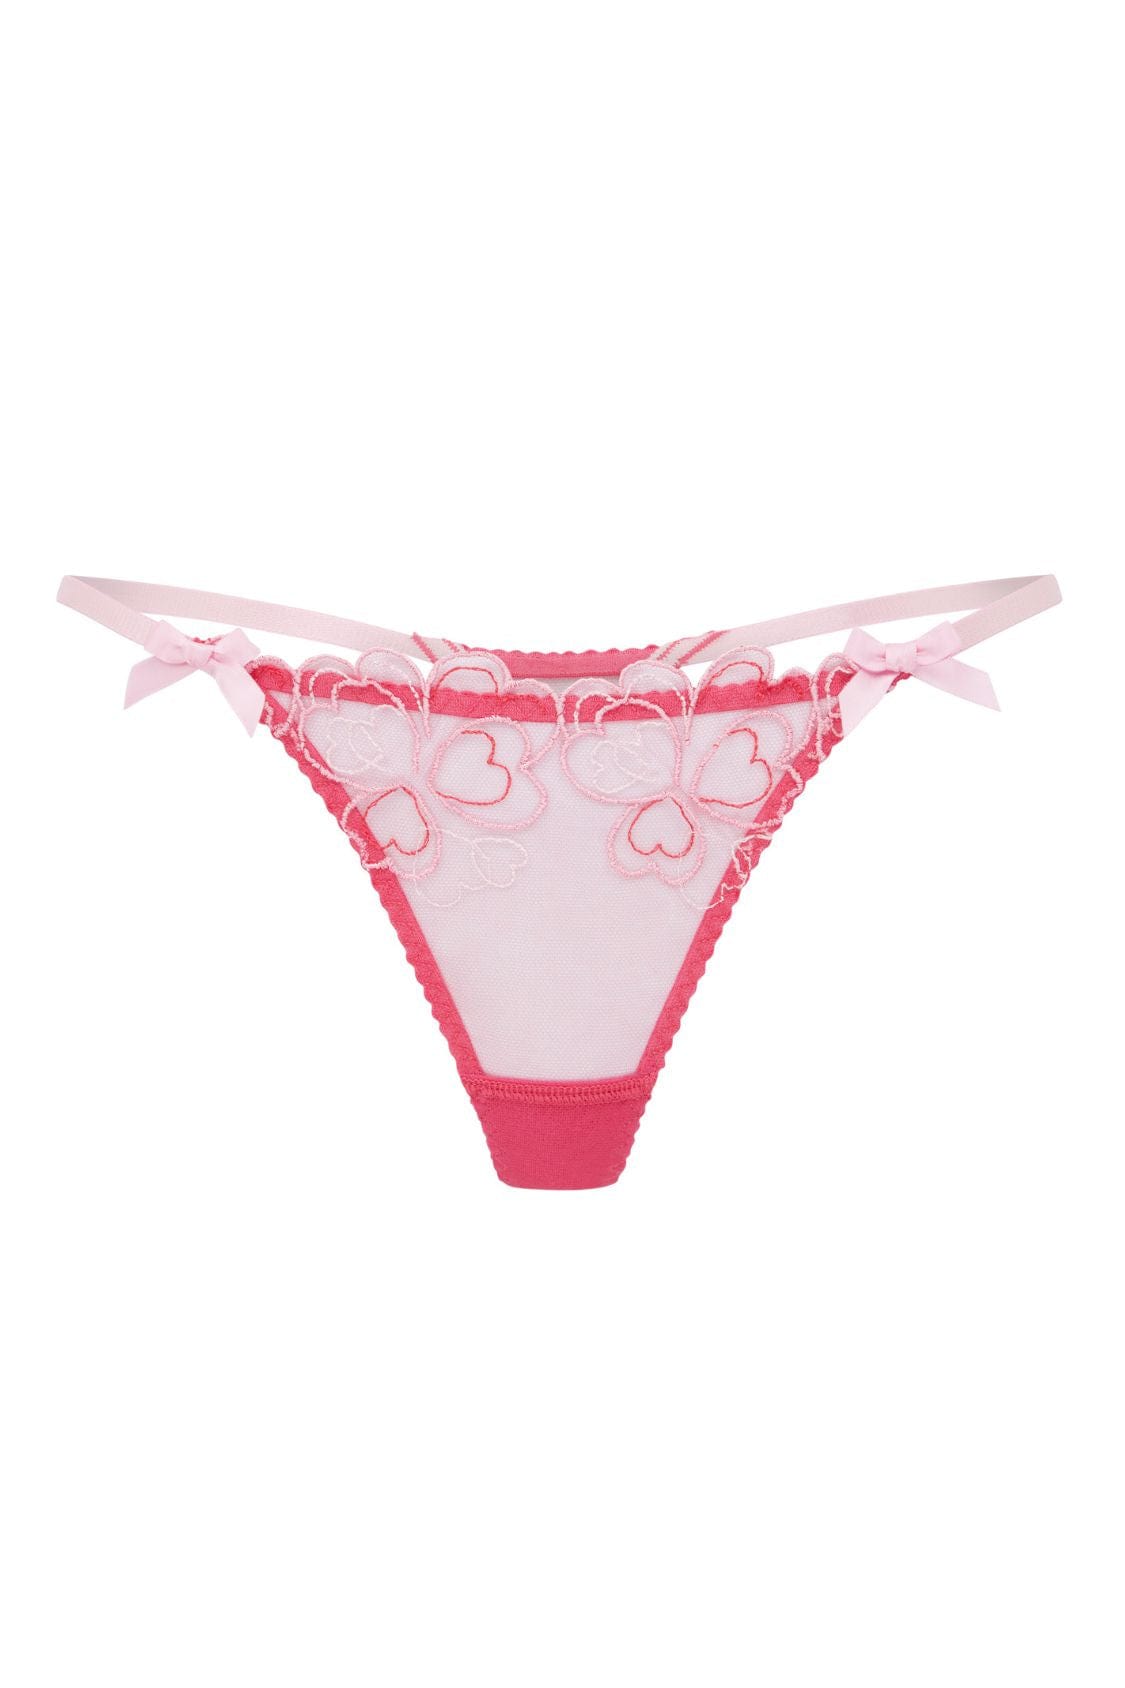 Agent Provocateur Thong Maysie Thong - Fuchsia/Baby Pink